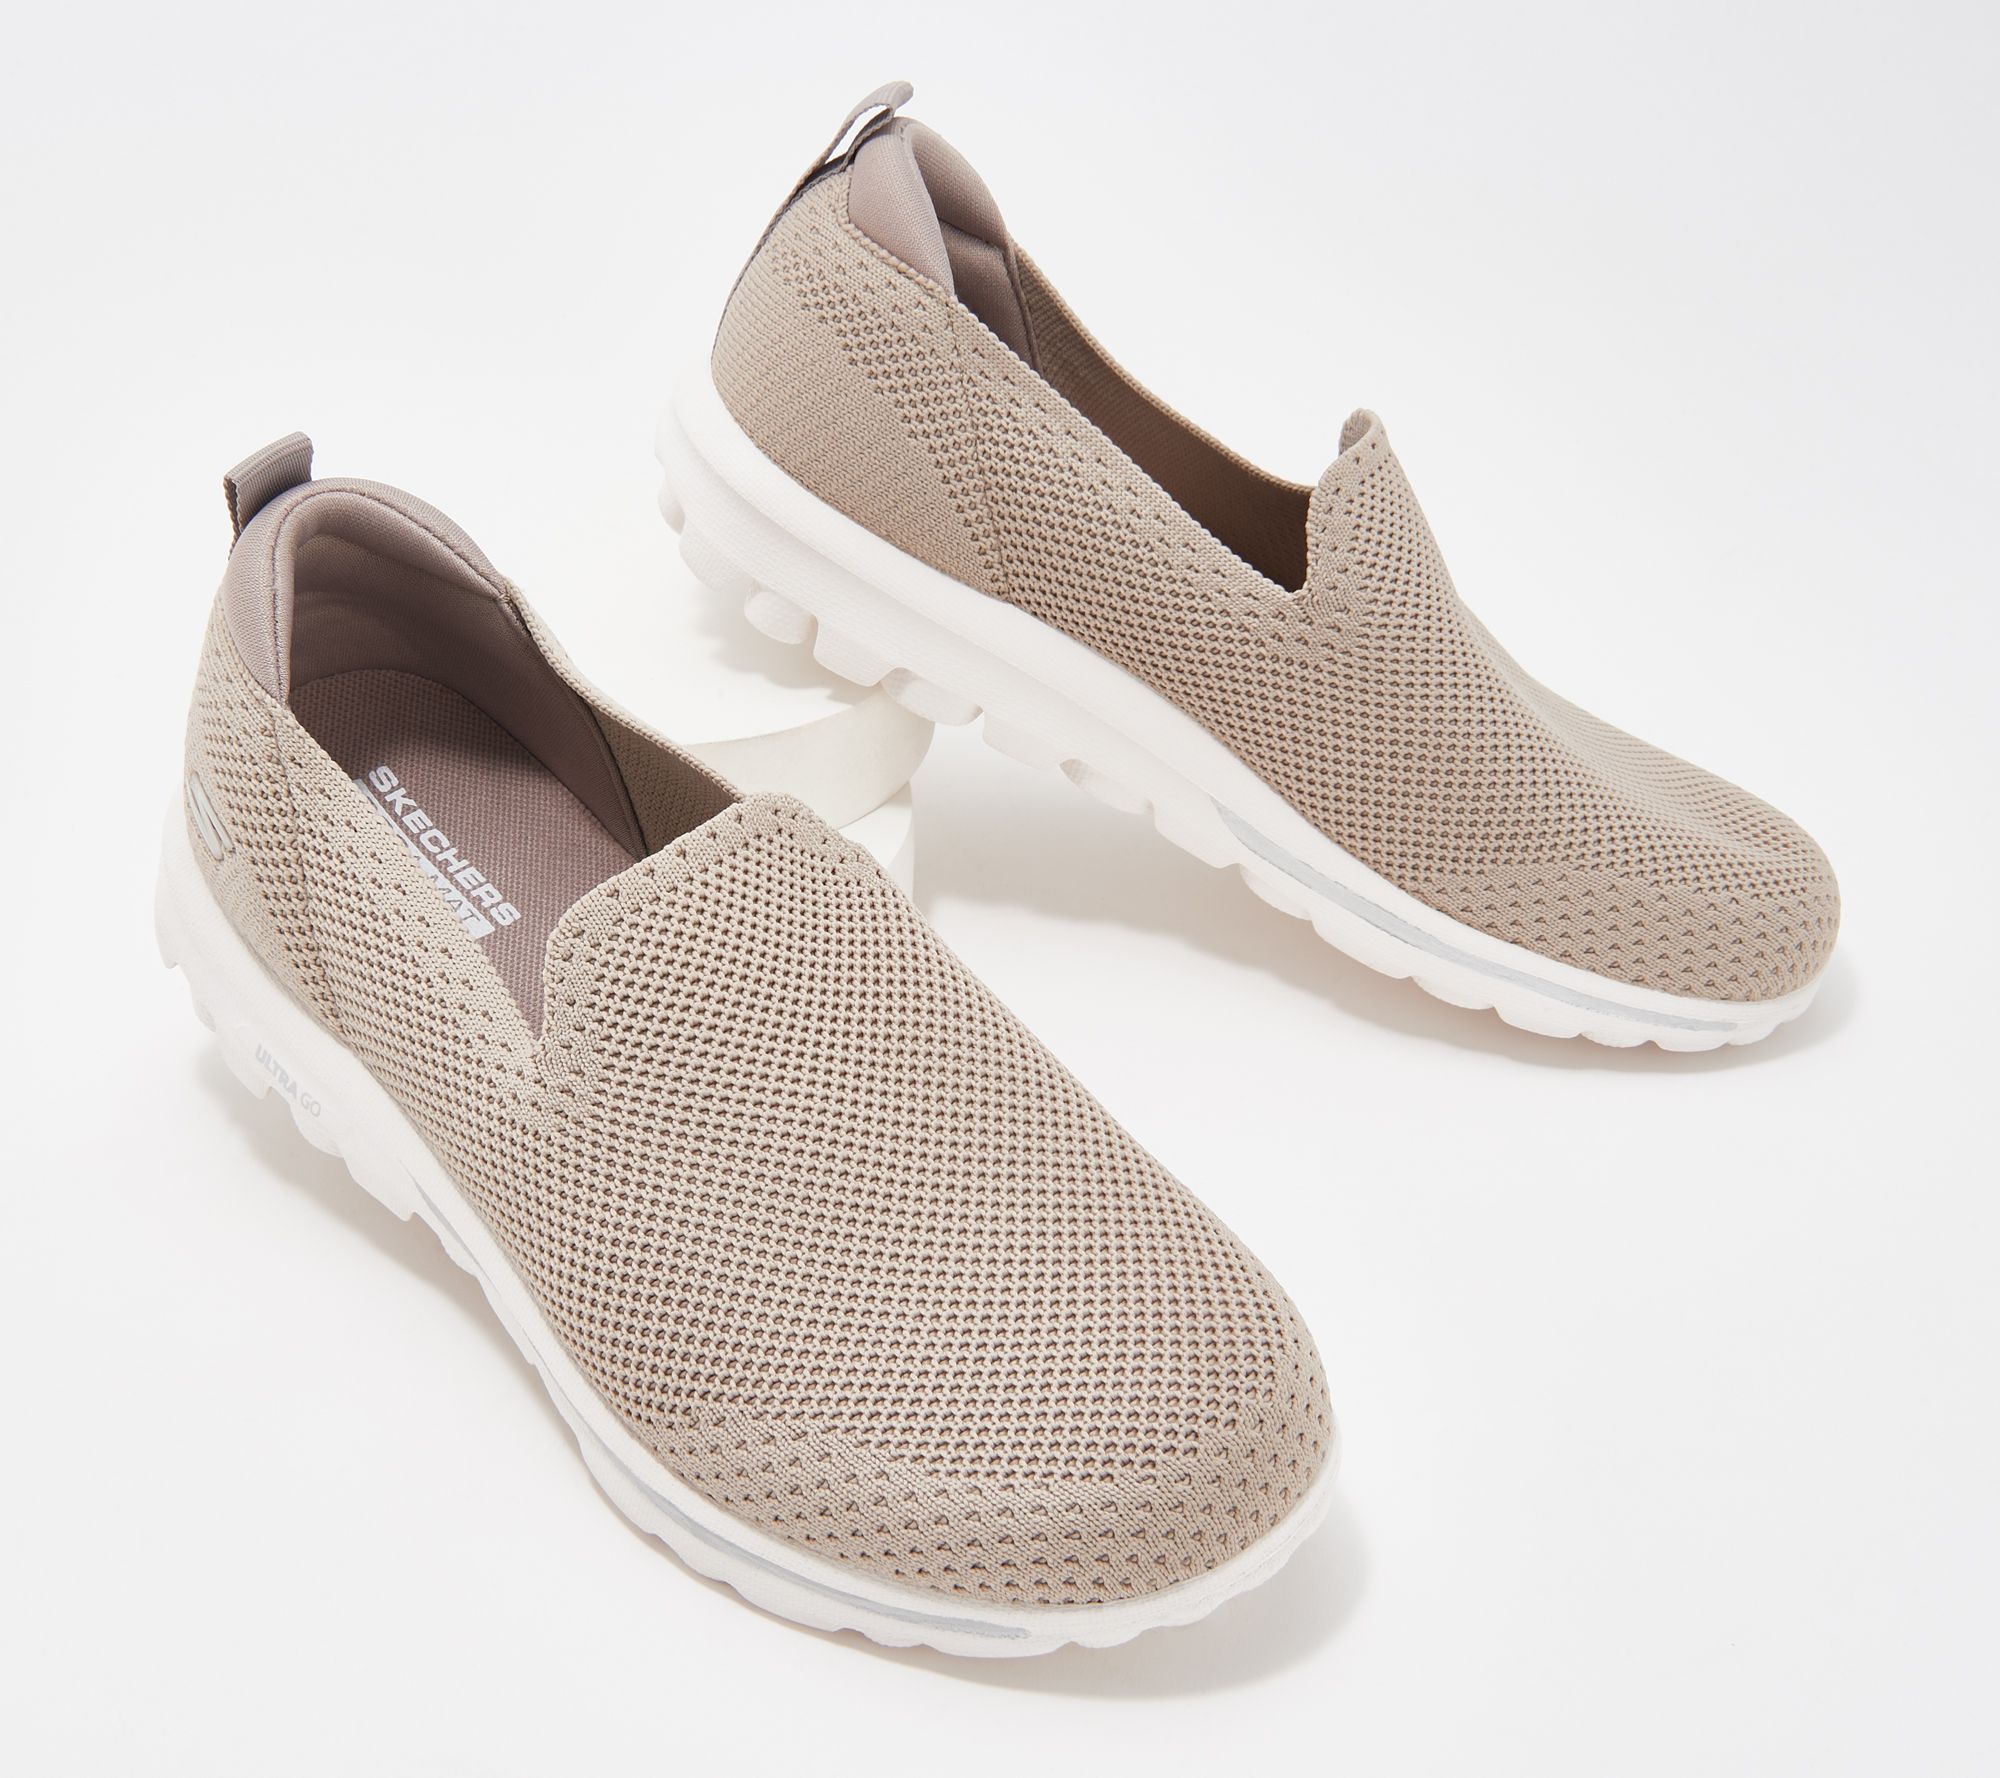 skechers stretch knit shoes for women